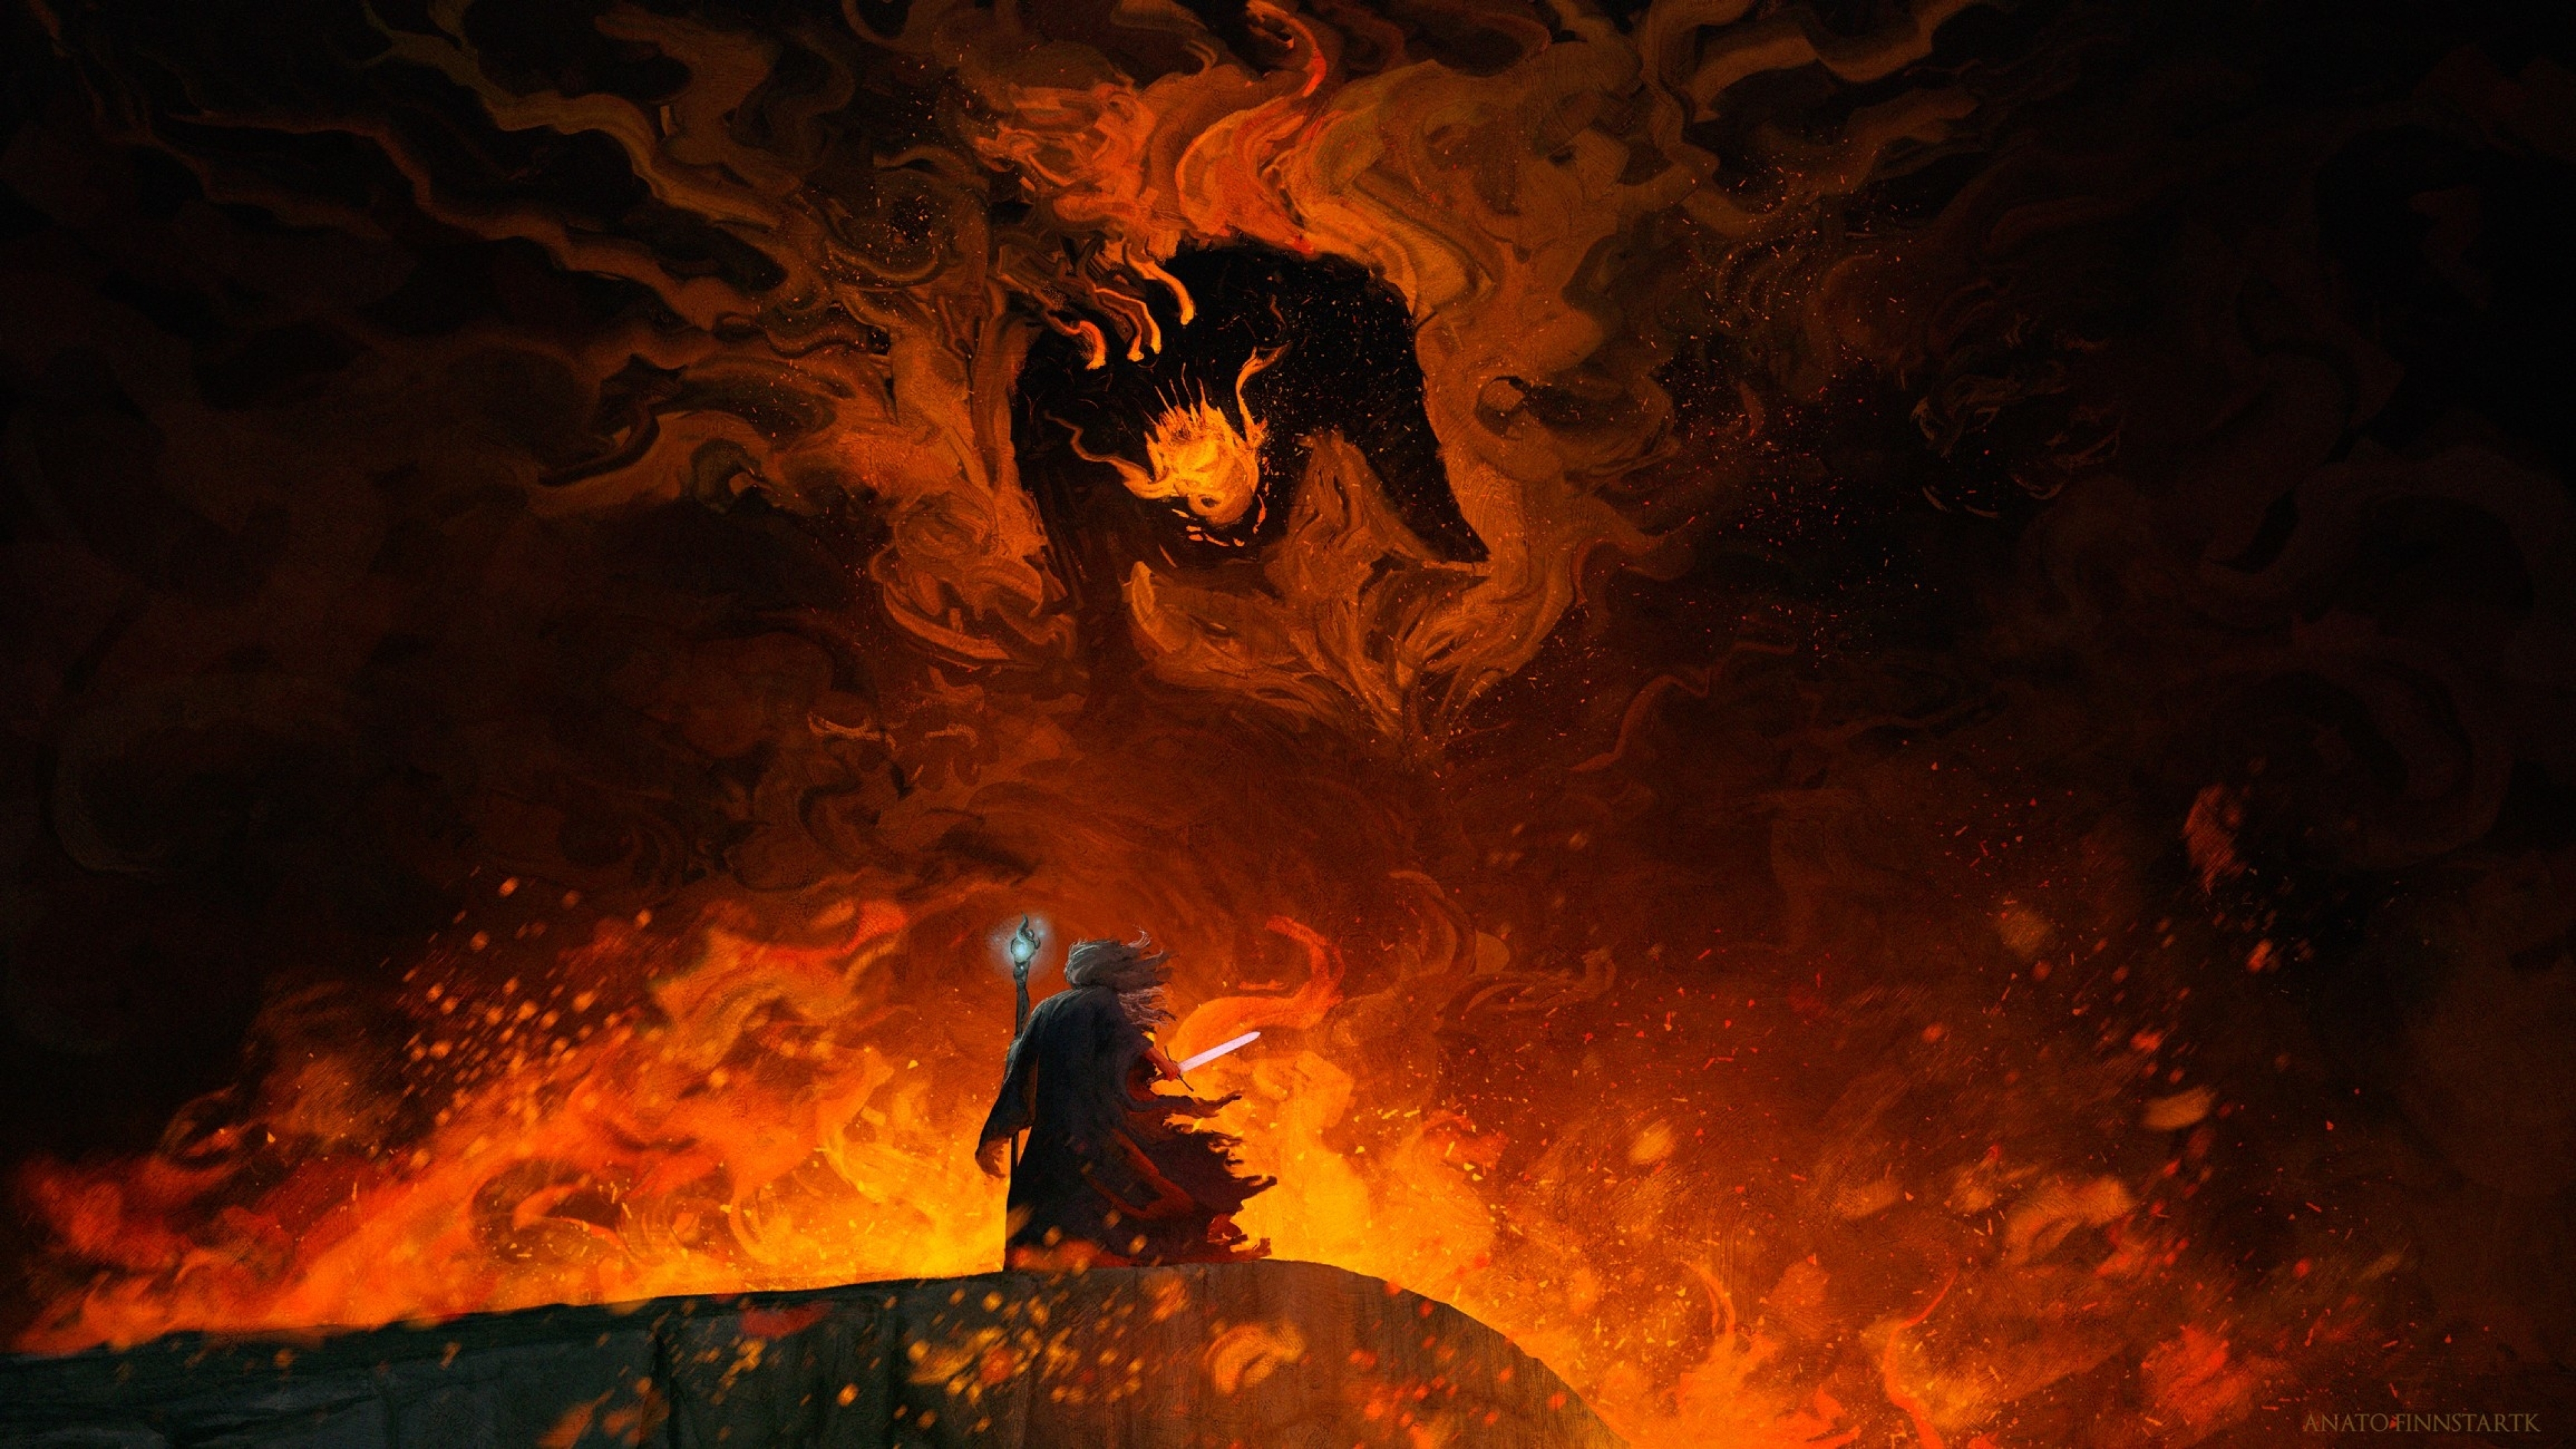 Gandalf Balrog The Lord Of The Rings Fantasy Art 3840x2160